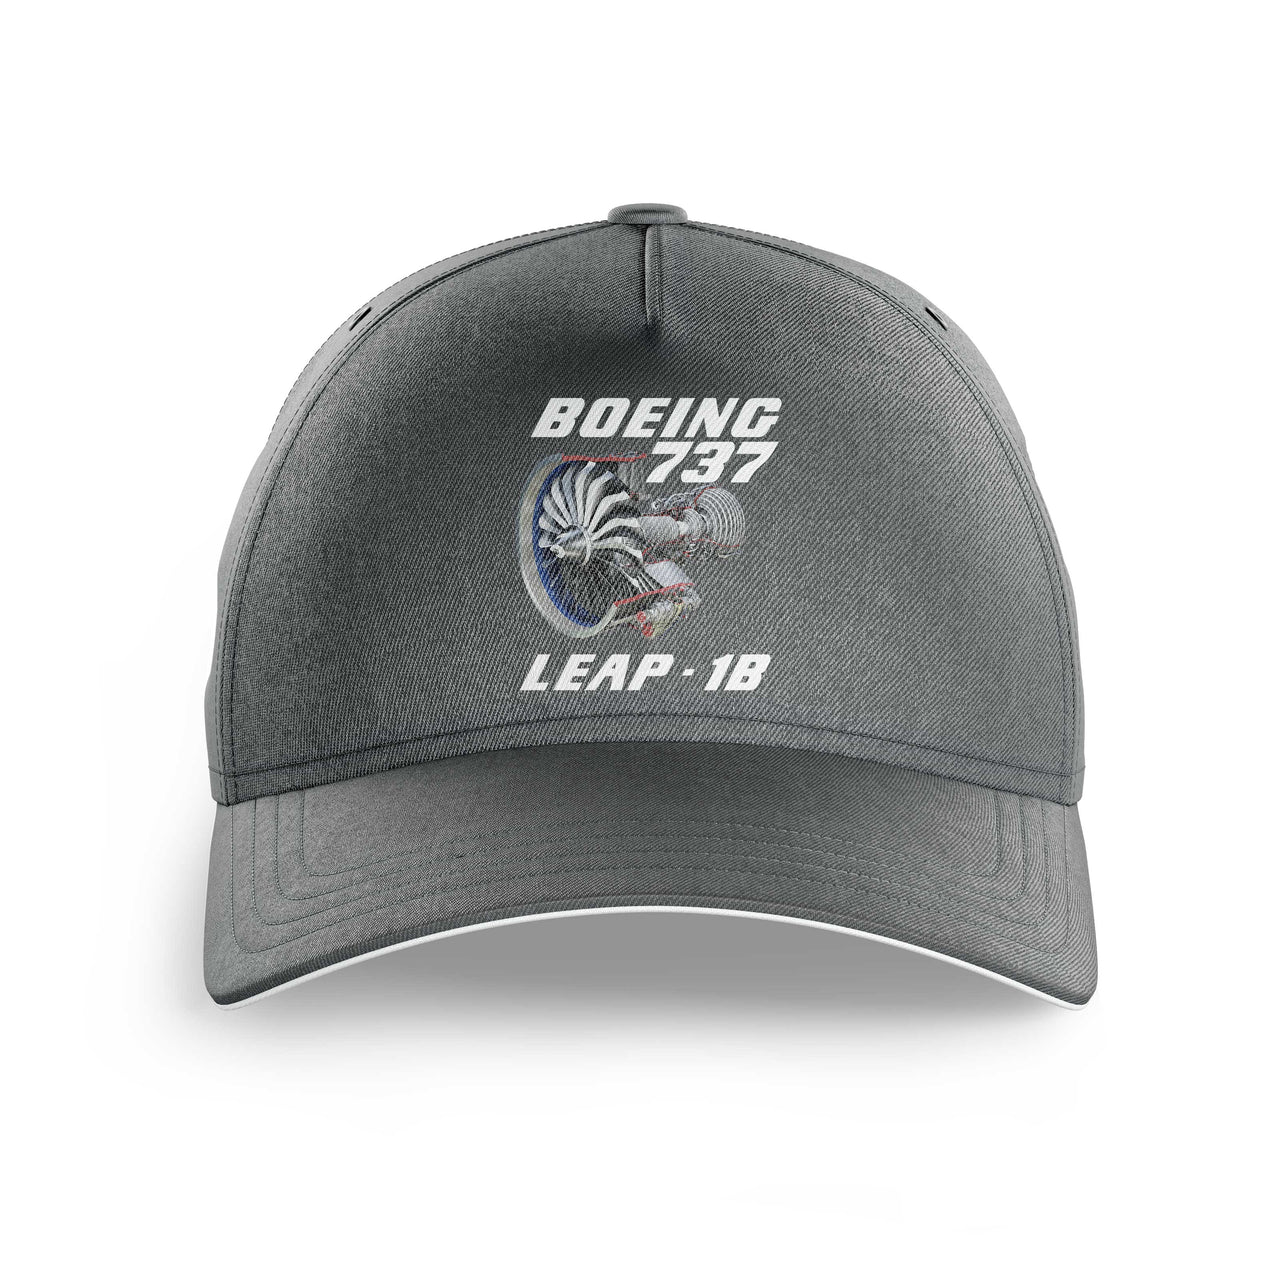 Boeing 737 & Leap 1B Engine Printed Hats